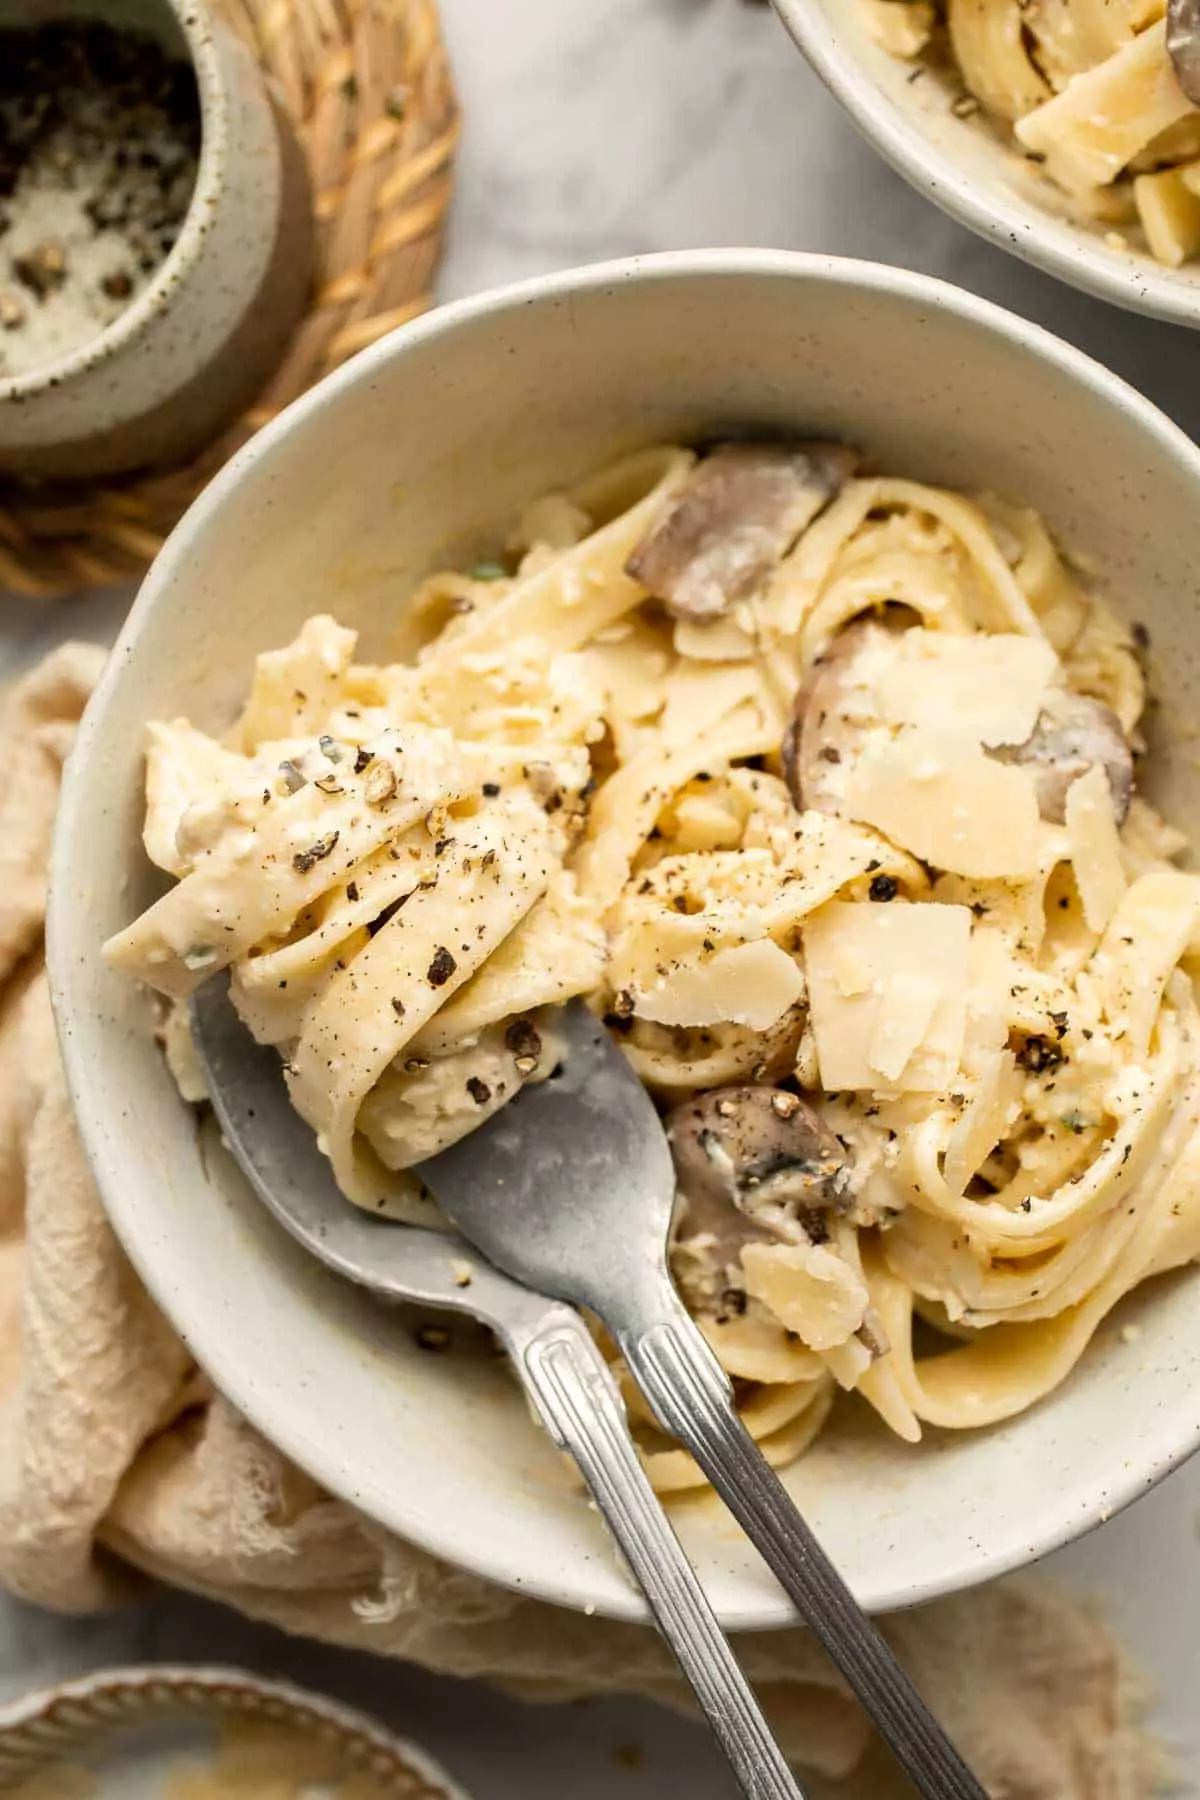 Creamy Mushroom Tagliatelle Pasta is a quick and easy, restaurant-worthy vegetarian dinner that is ready in just 30 minutes! Elevated comfort food at home.